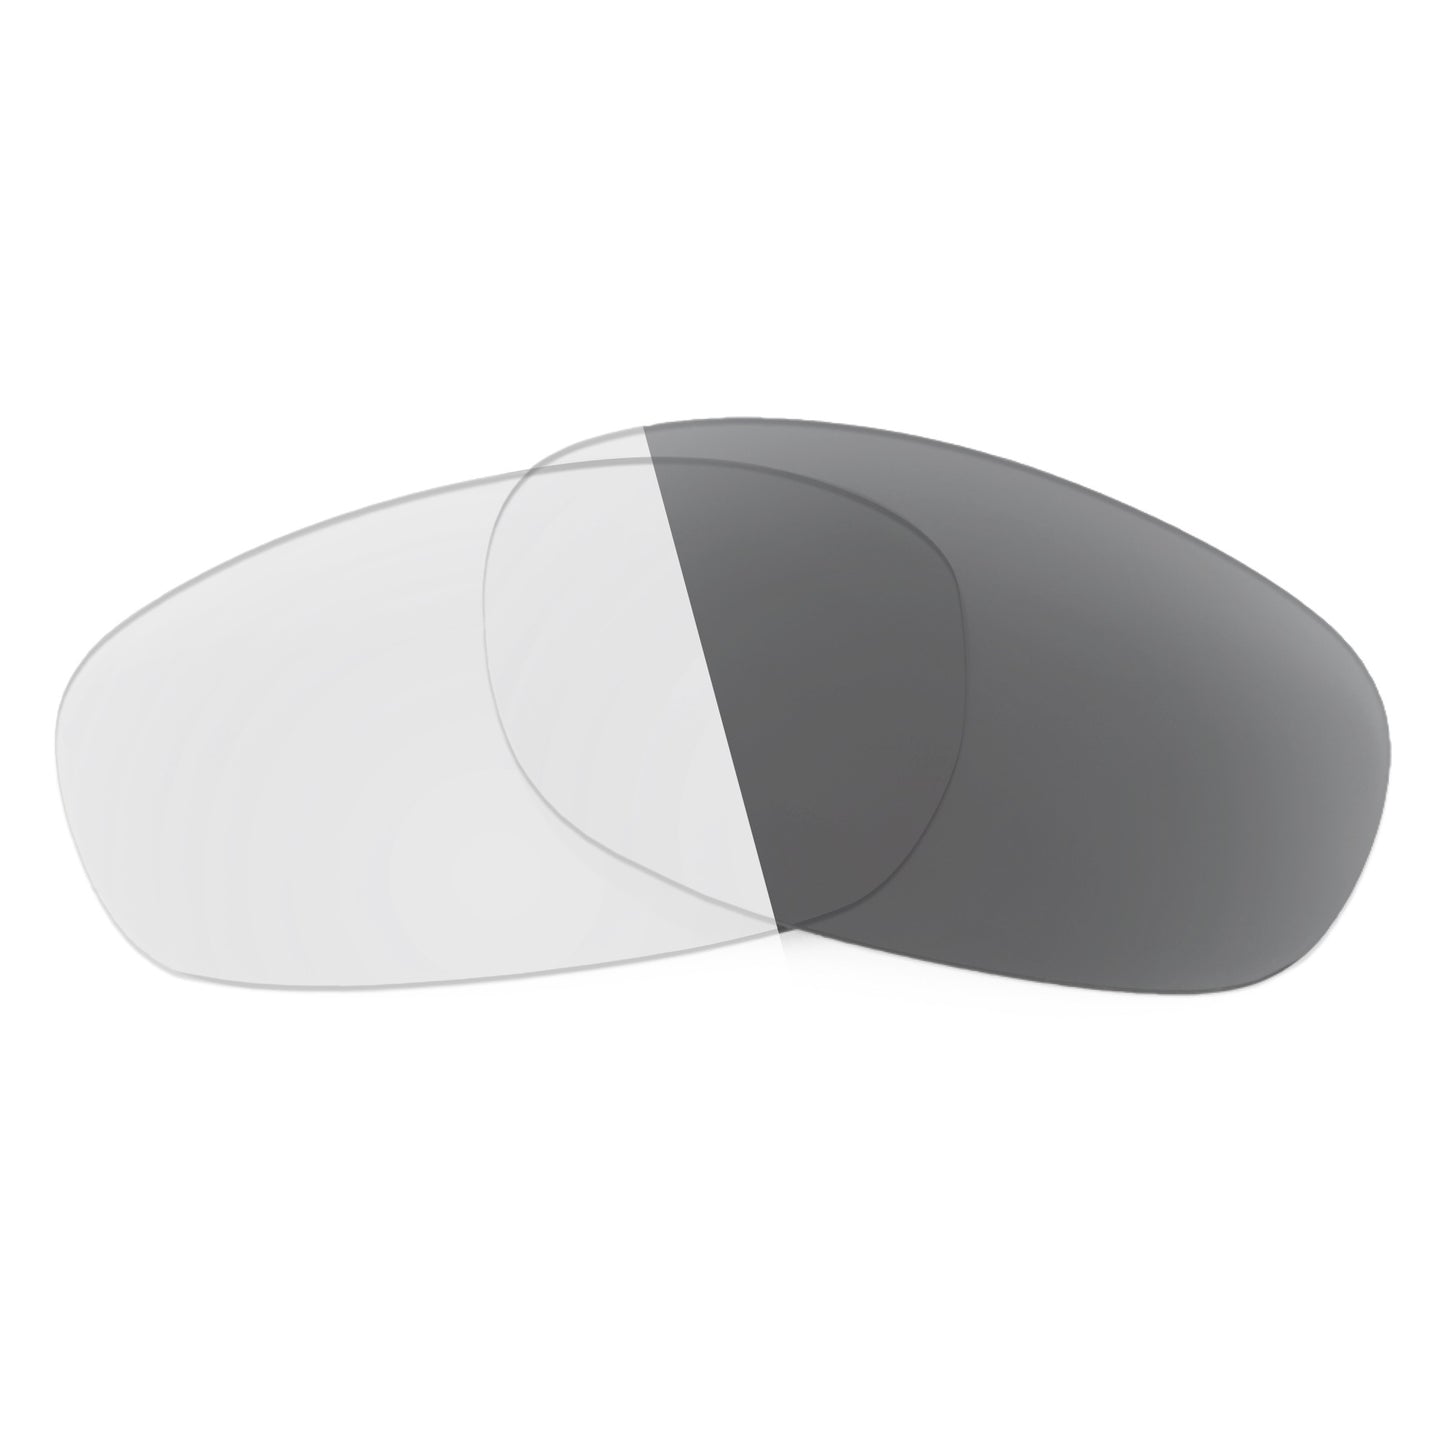 Revant replacement lenses for Costa Prop Non-Polarized Adapt Gray Photochromic